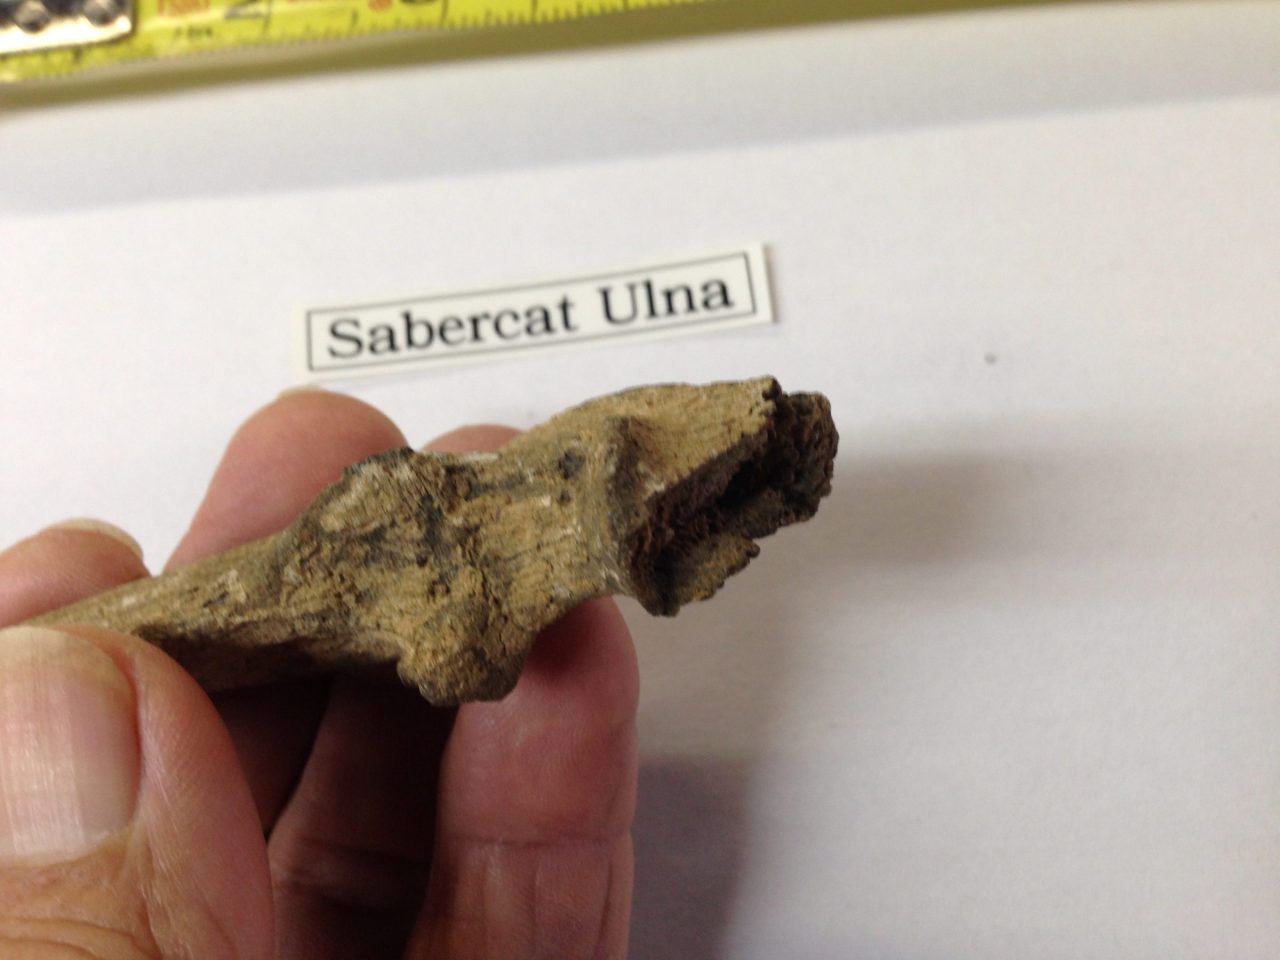 Fossil Sabercat Ulna | Fossils & Artifacts for Sale | Paleo Enterprises | Fossils & Artifacts for Sale